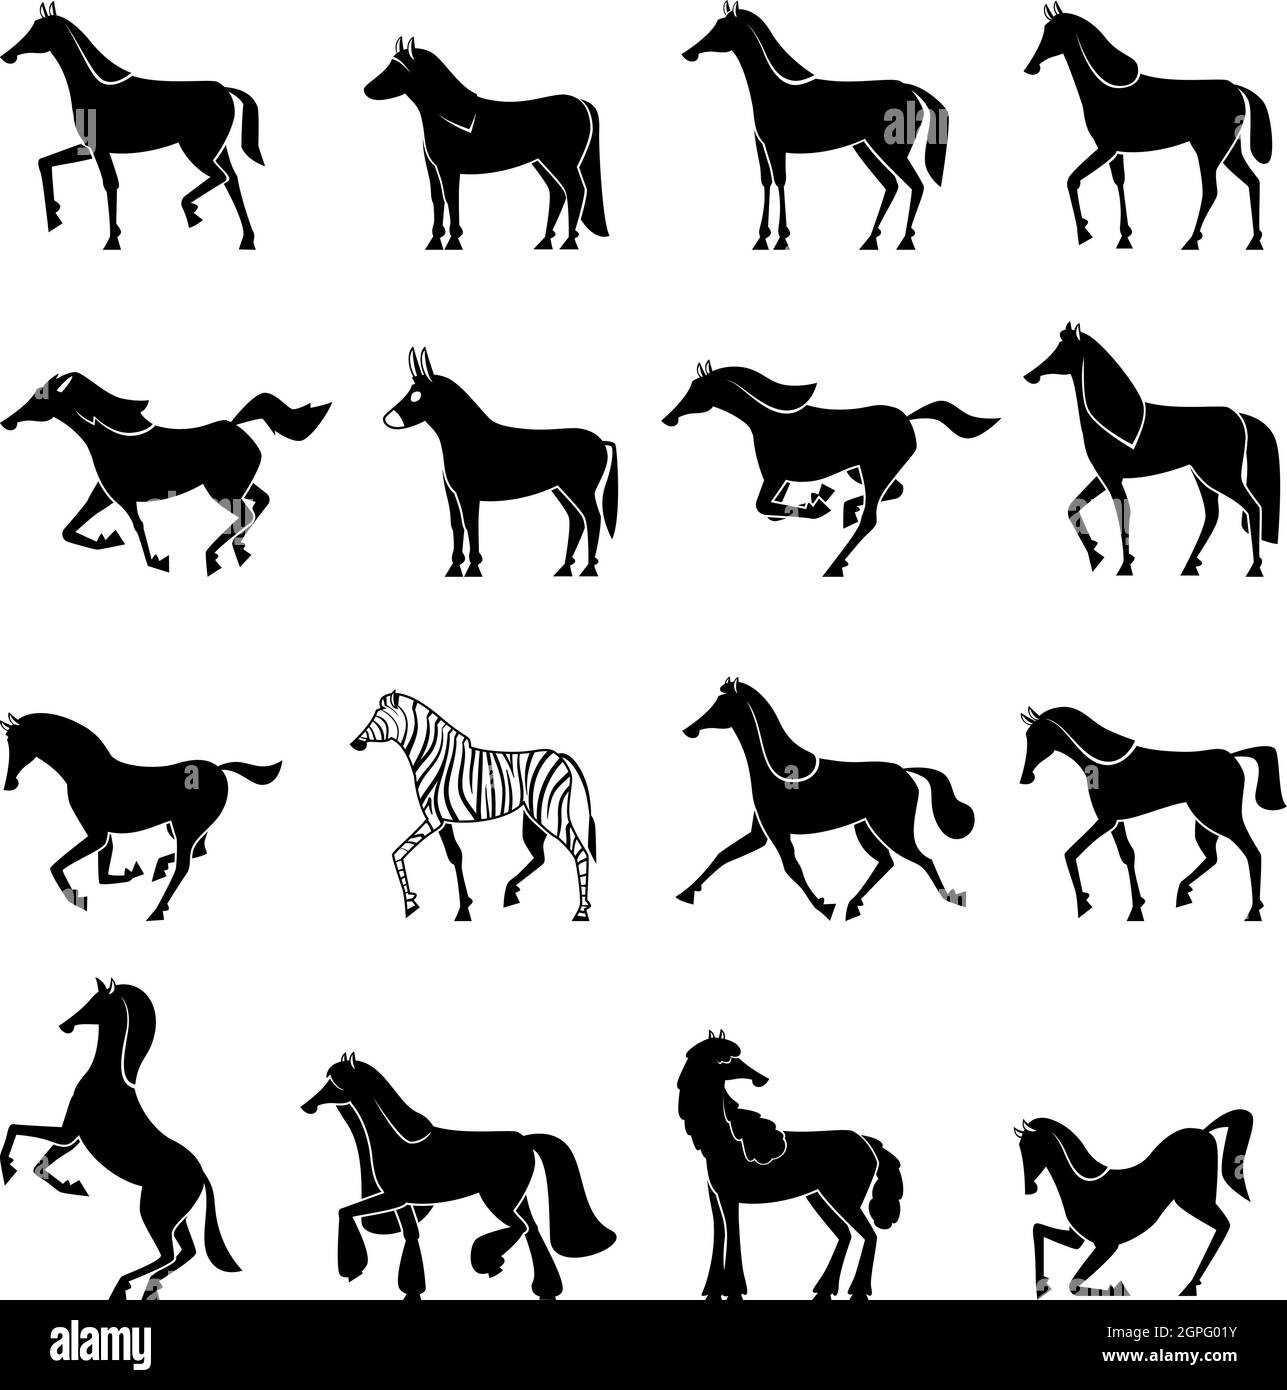 Horse silhouettes. Strong beautiful domestic animals horses in action poses running walking gallop jumping vector illustrations Stock Vector